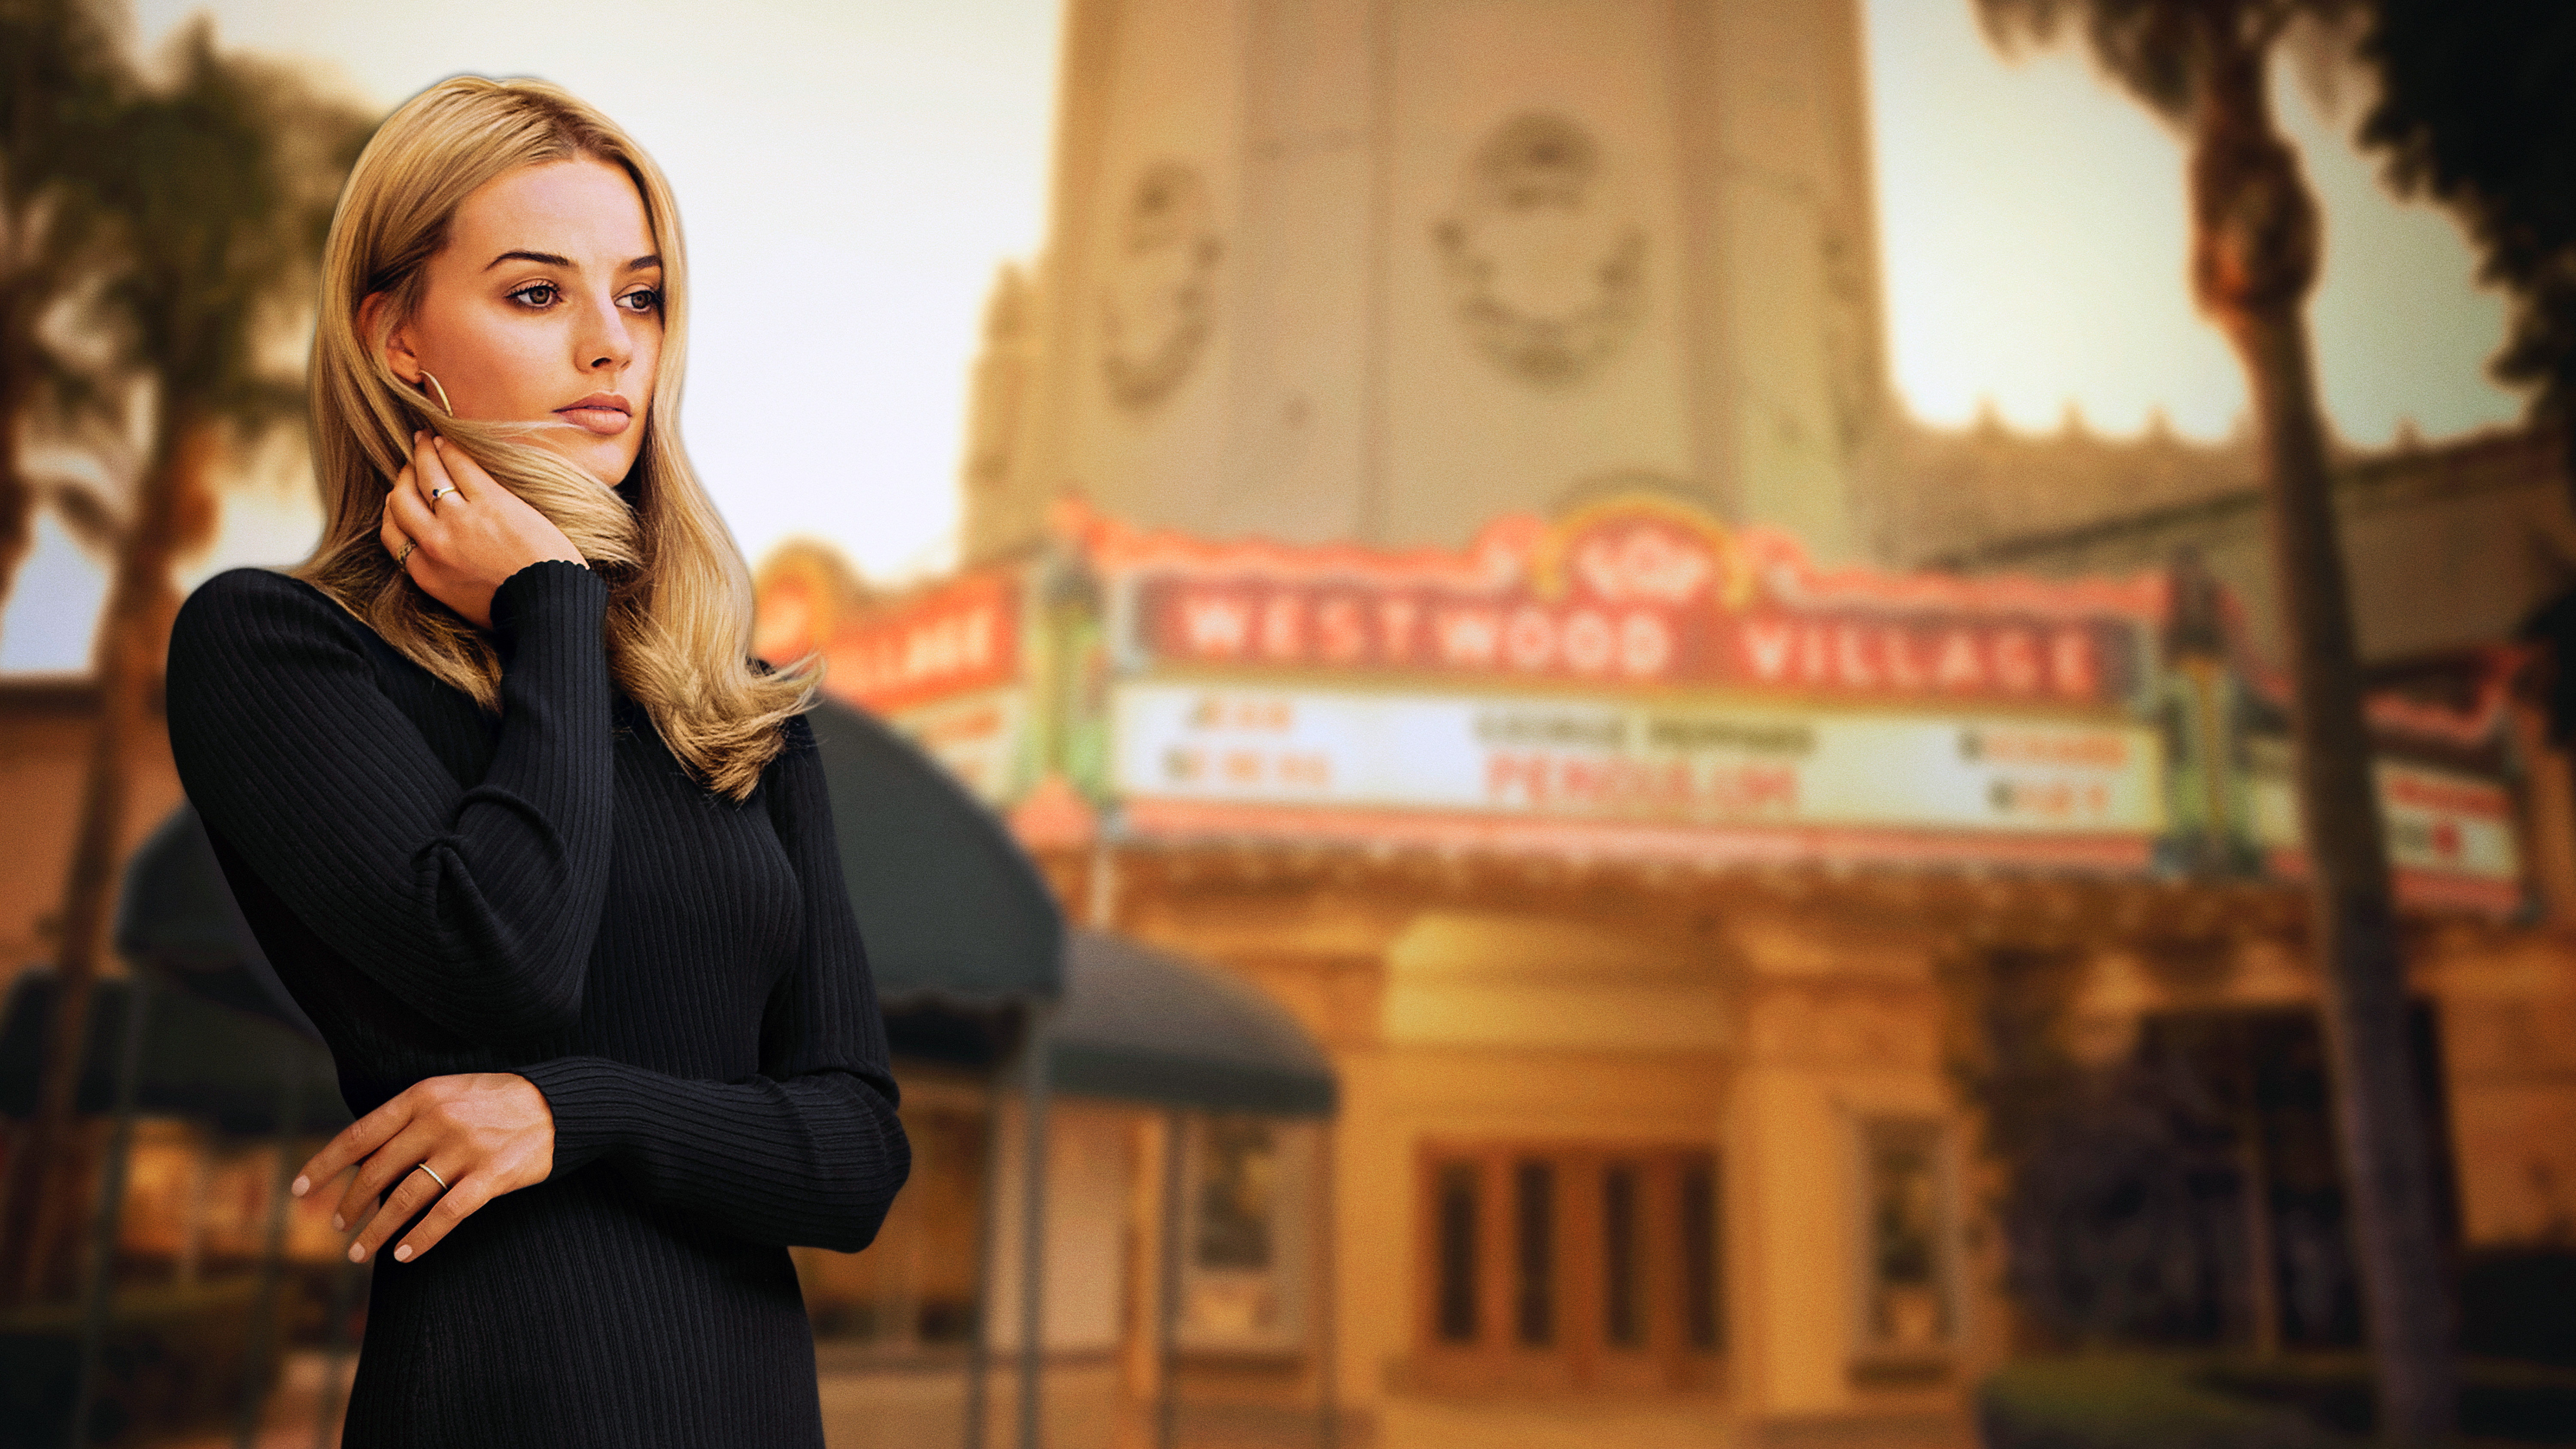 Margot Robbie Once Upon A Time In Hollywood 2019 5K Wallpapers